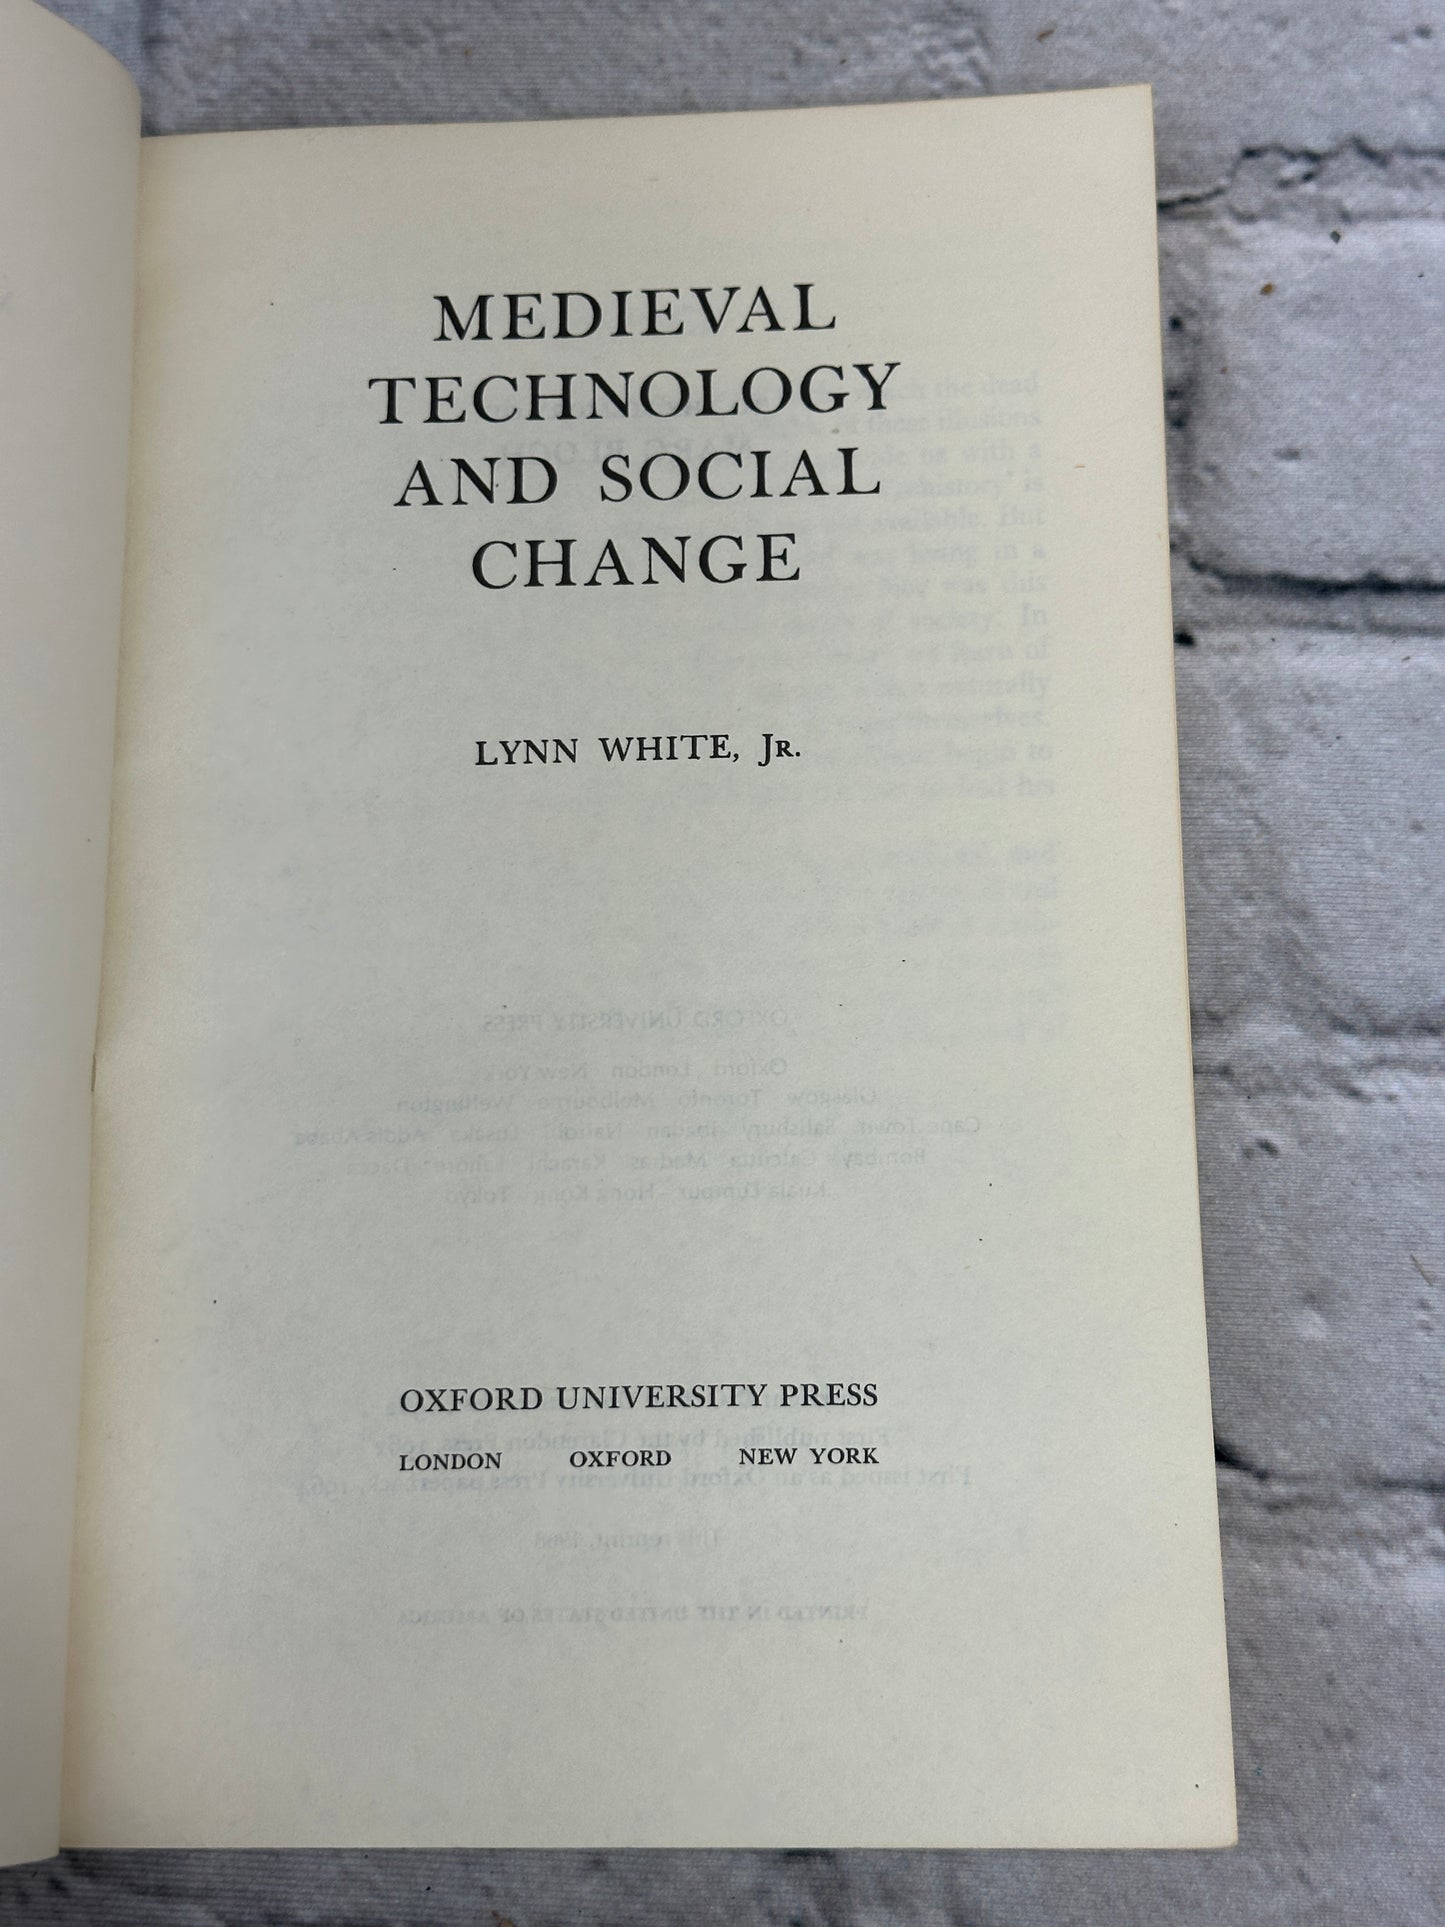 Medieval Technology and Social Change by Lynn White Jr. [1968]